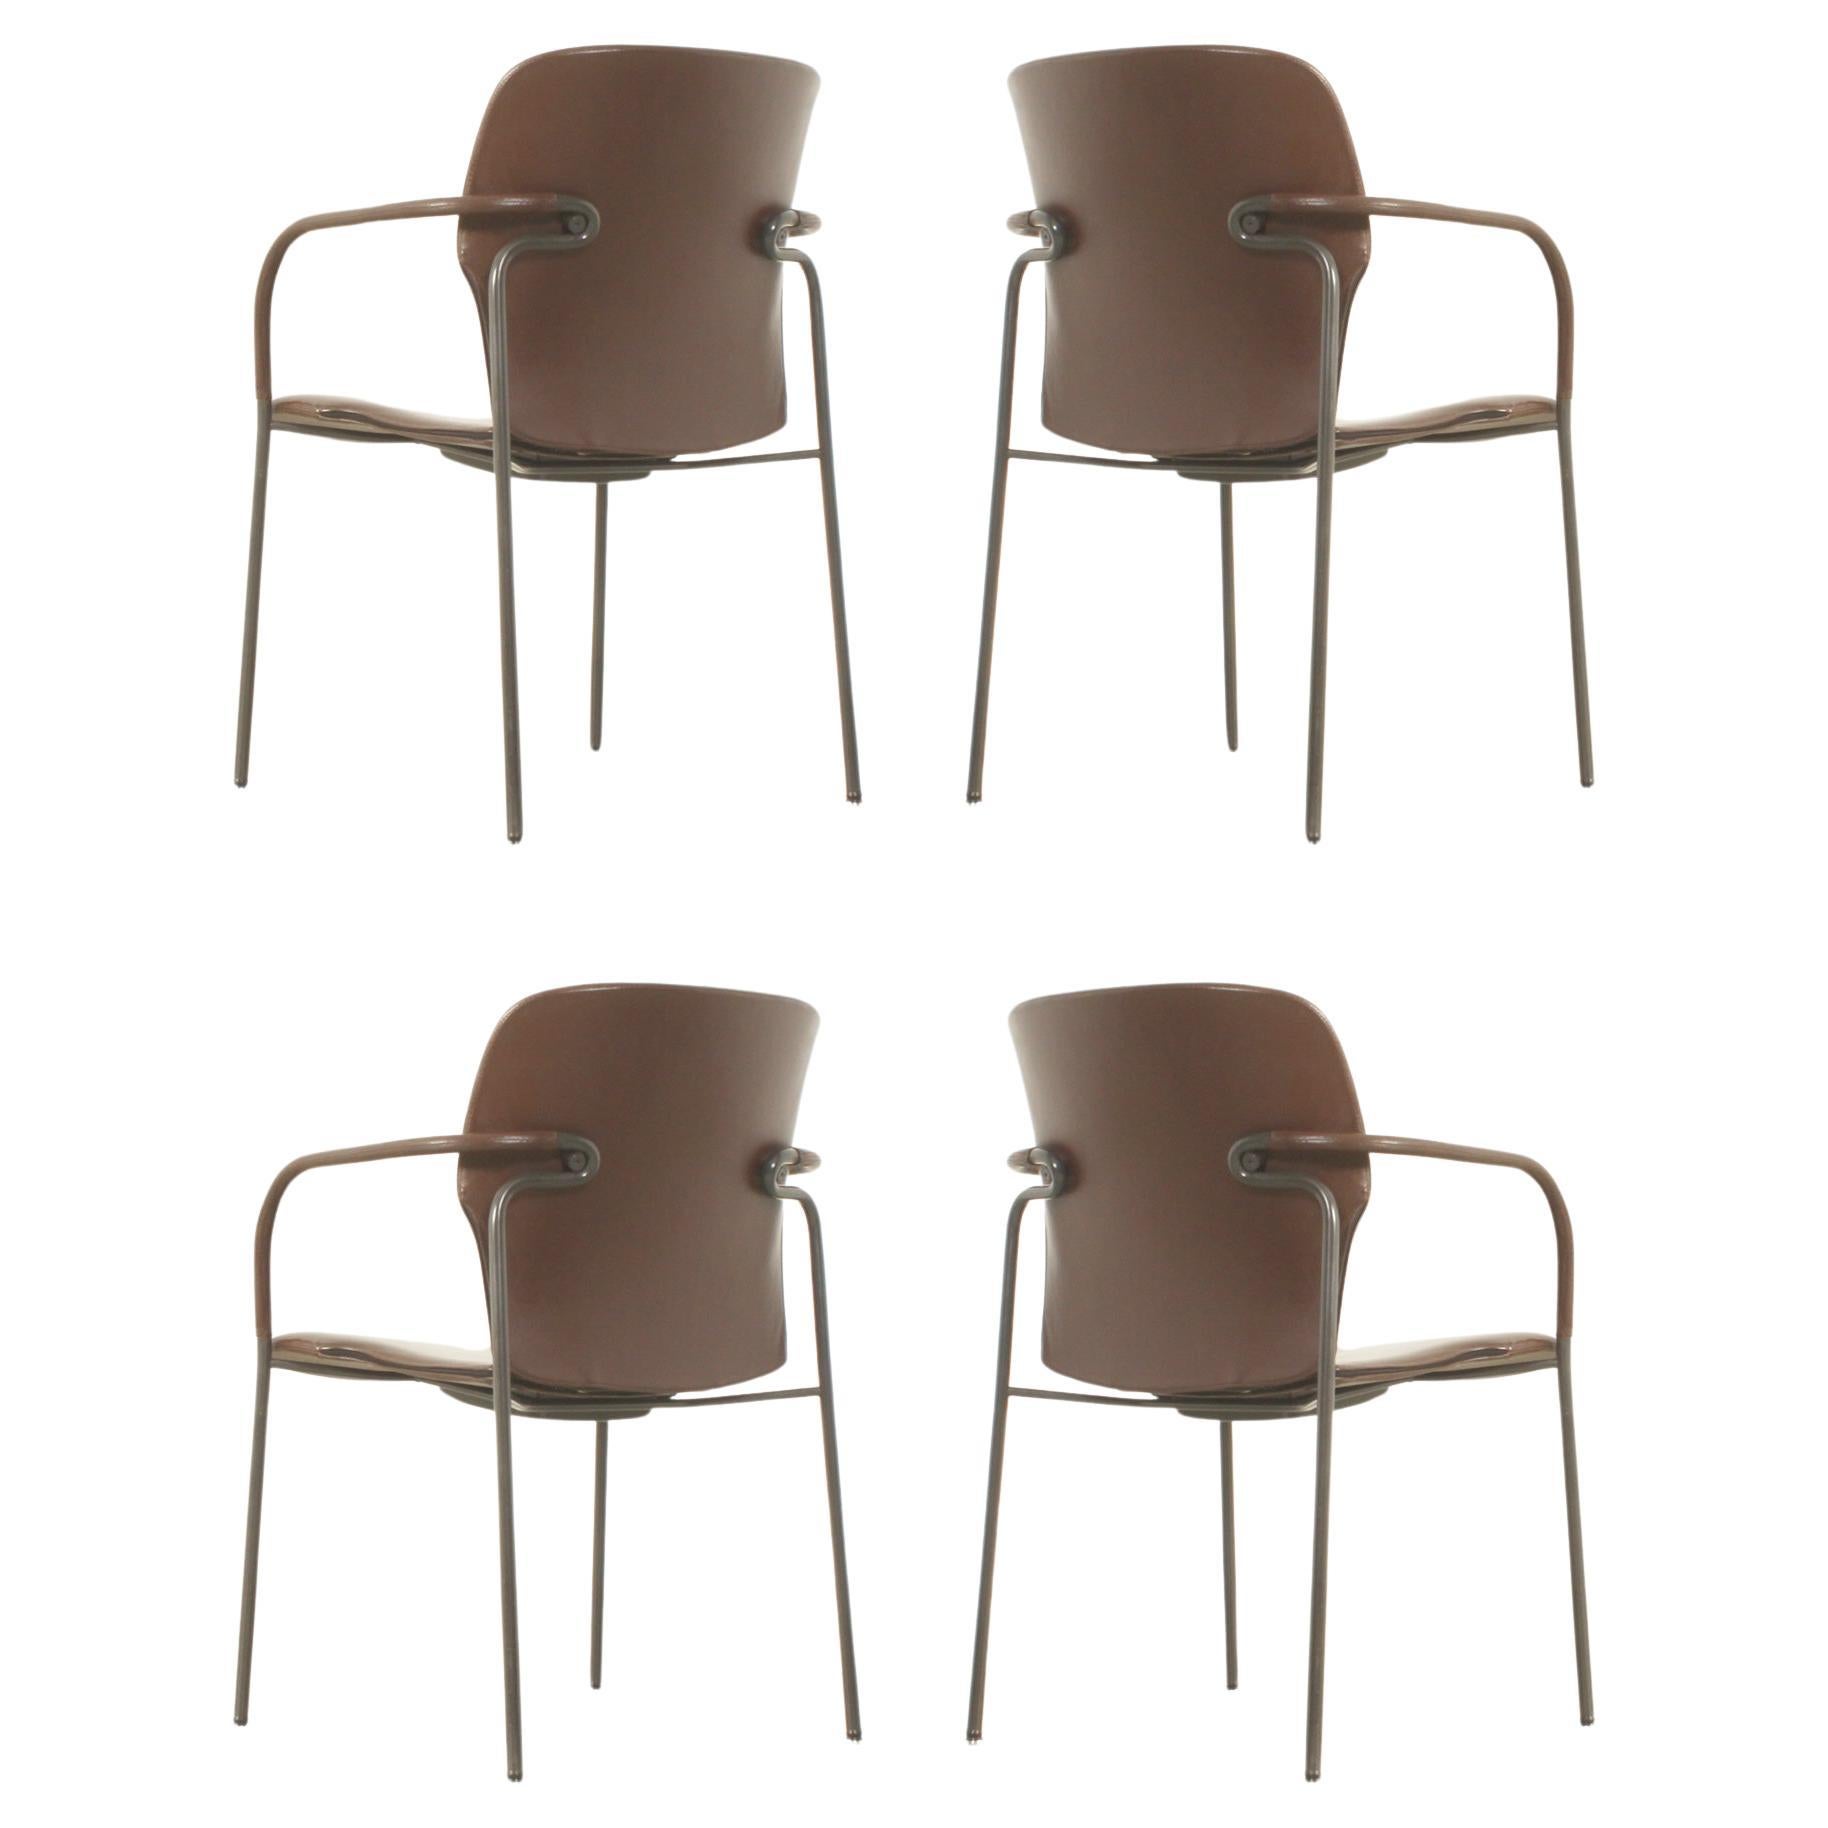 Four Leather Lalanda Chairs by Gianfranco Frattini, 1980's